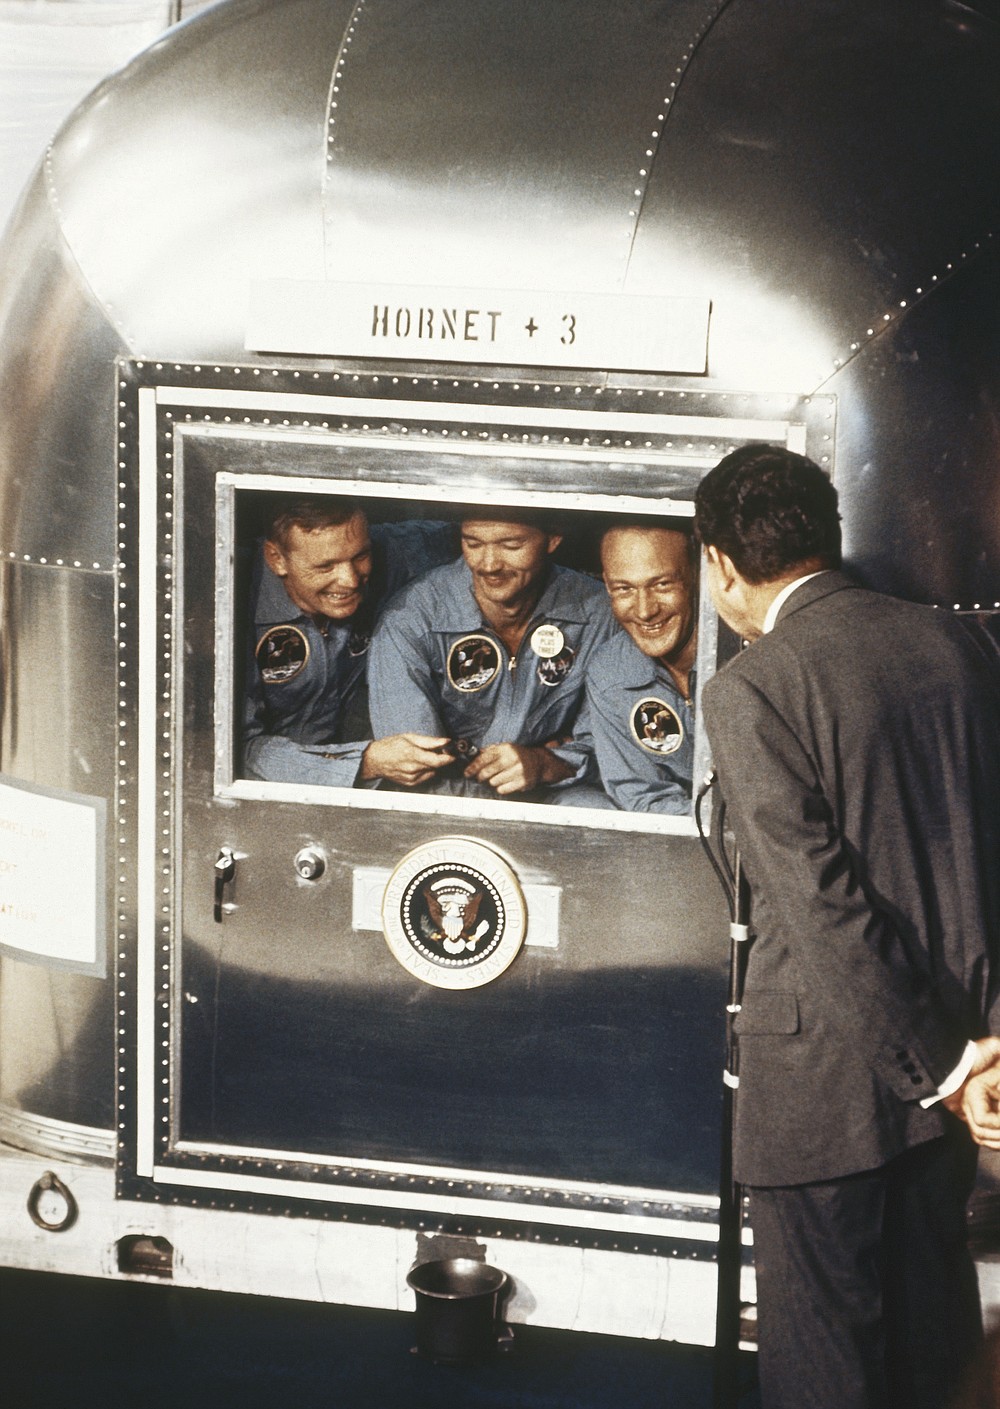 FILE - In this July 24, 1969 file photo, President Richard Nixon, back to camera, greets the Apollo 11 astronauts in a quarantine van on board the U.S.S. Hornet after splashdown and recovery in the Pacific Ocean. From left are Neil Armstrong, Michael Collins, and Edwin "Buzz" Aldrin. Splashdown was east of Wake Island, and south of Johnston Atoll. Collins, who piloted the ship from which Armstrong and Aldrin left to make their historic first steps on the moon in 1969, died Wednesday, April 28, 2021, of cancer, his family said. He was 90. (AP Photo/File)